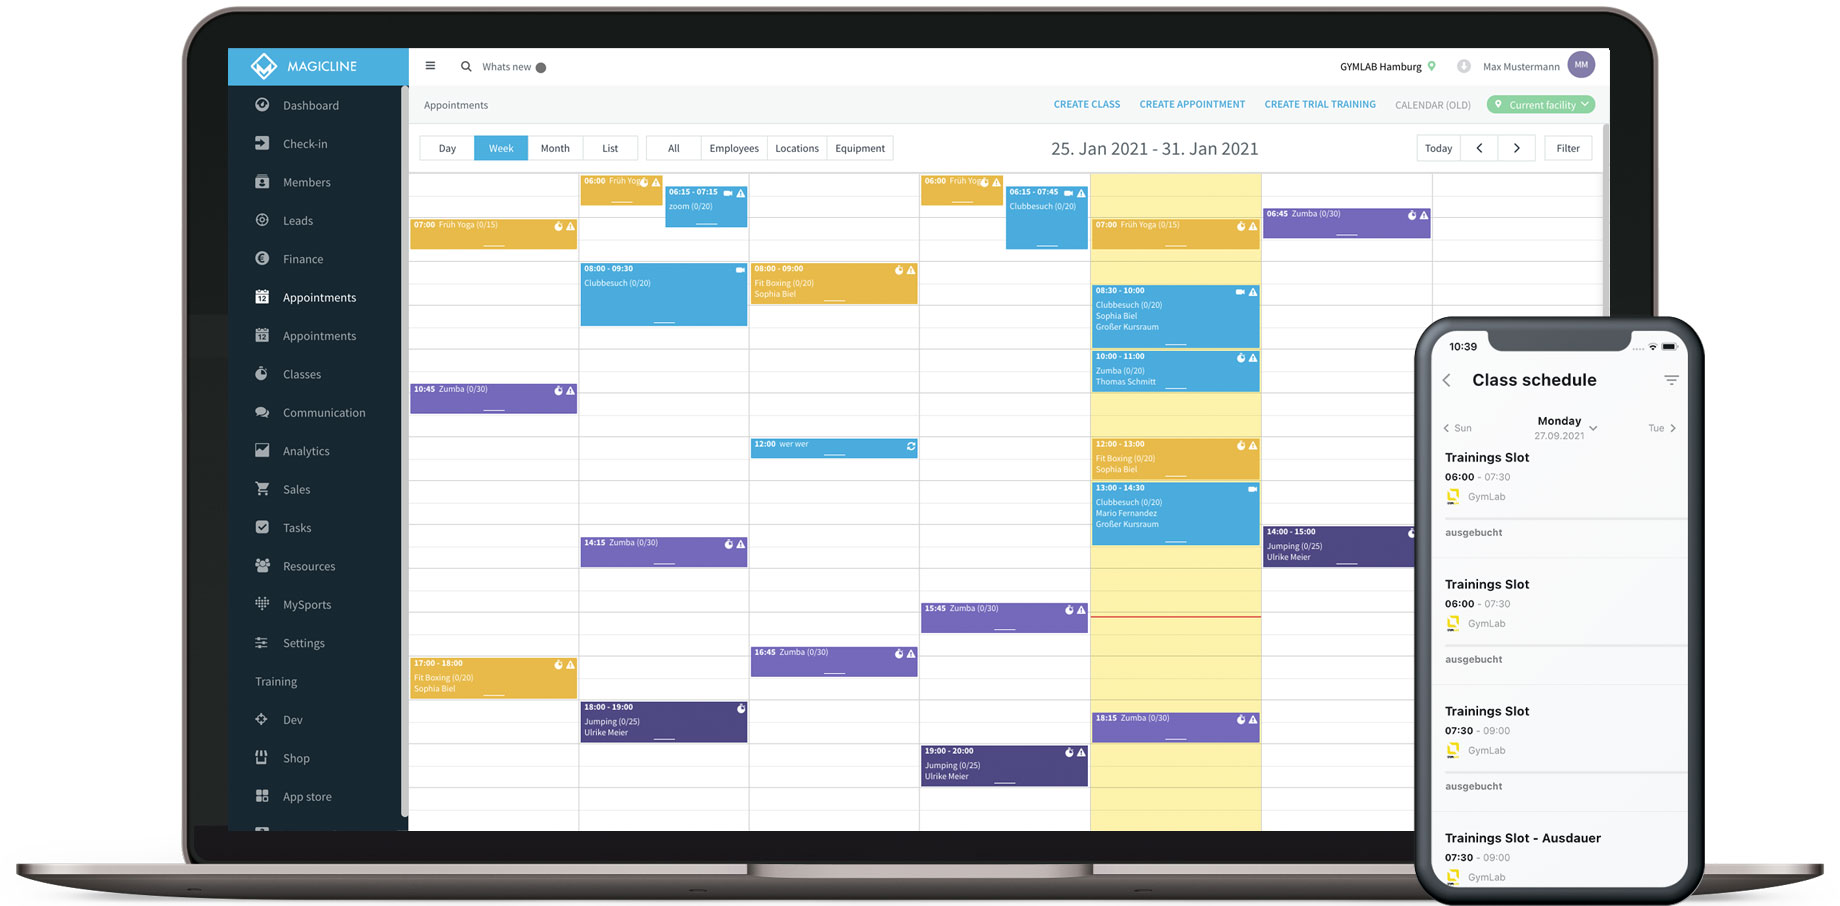 With our scheduling tool class planning becomes easier than ever. It takes all resources that are required for a session including staff, rooms and equipment into account automatically and thus avoids conflicts of any kind. You can also set a maximum amount of participants per class and create waiting list options to avoid overbooking.